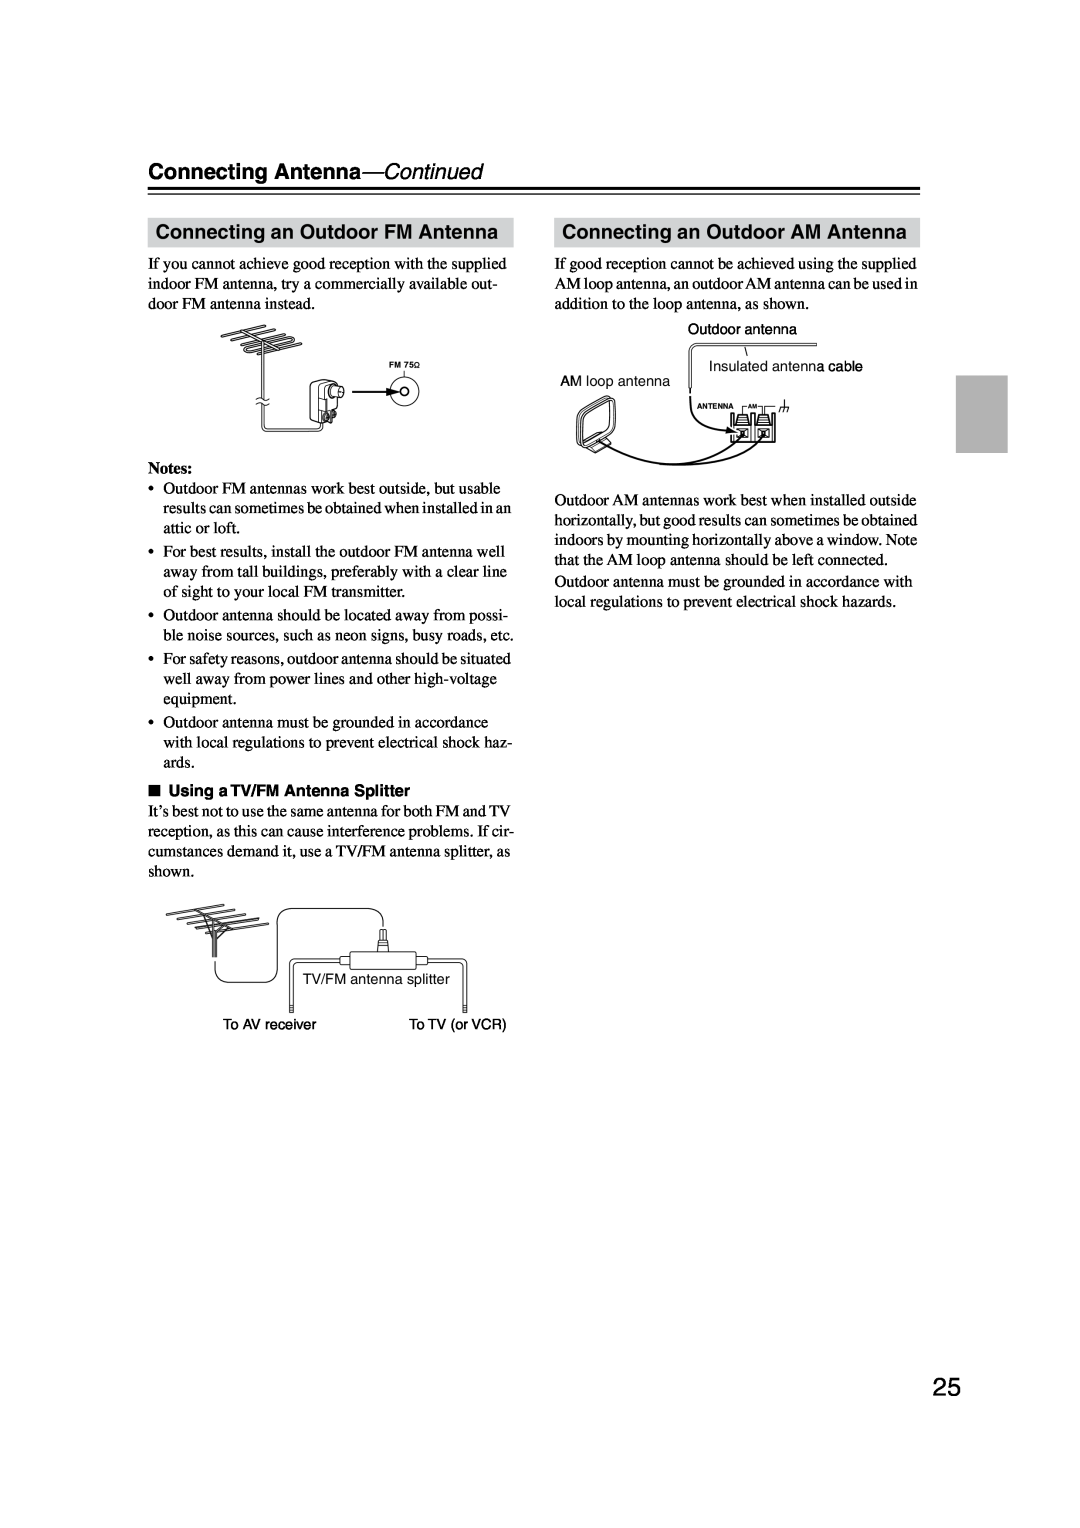 Onkyo HT-S4100 Connecting Antenna-Continued, Connecting an Outdoor FM Antenna, Connecting an Outdoor AM Antenna 